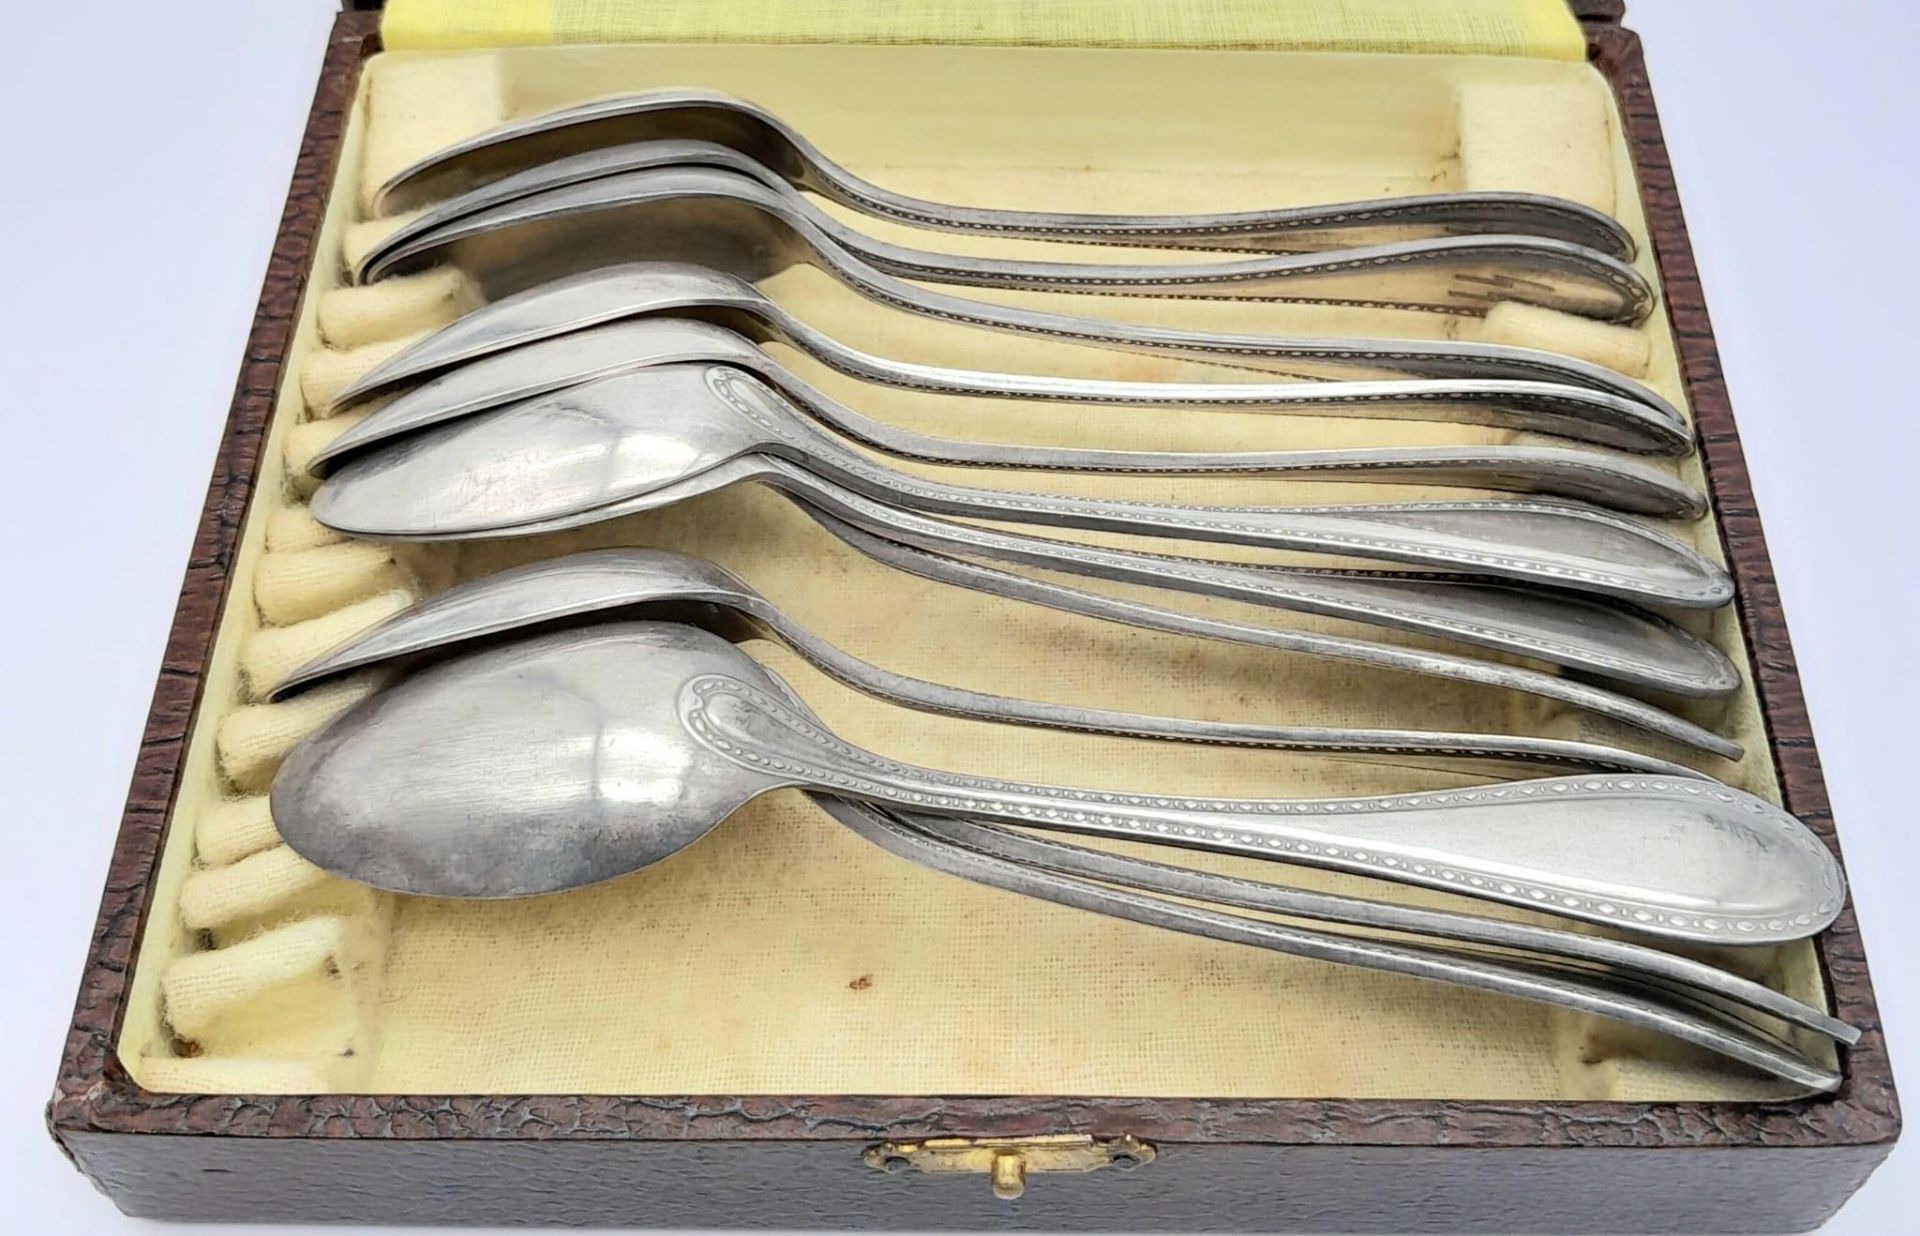 3rd Reich Waffen SS Set of 12 Silver Spoons with makers mark one the bowls. Tested as .800 Silver. - Bild 3 aus 4